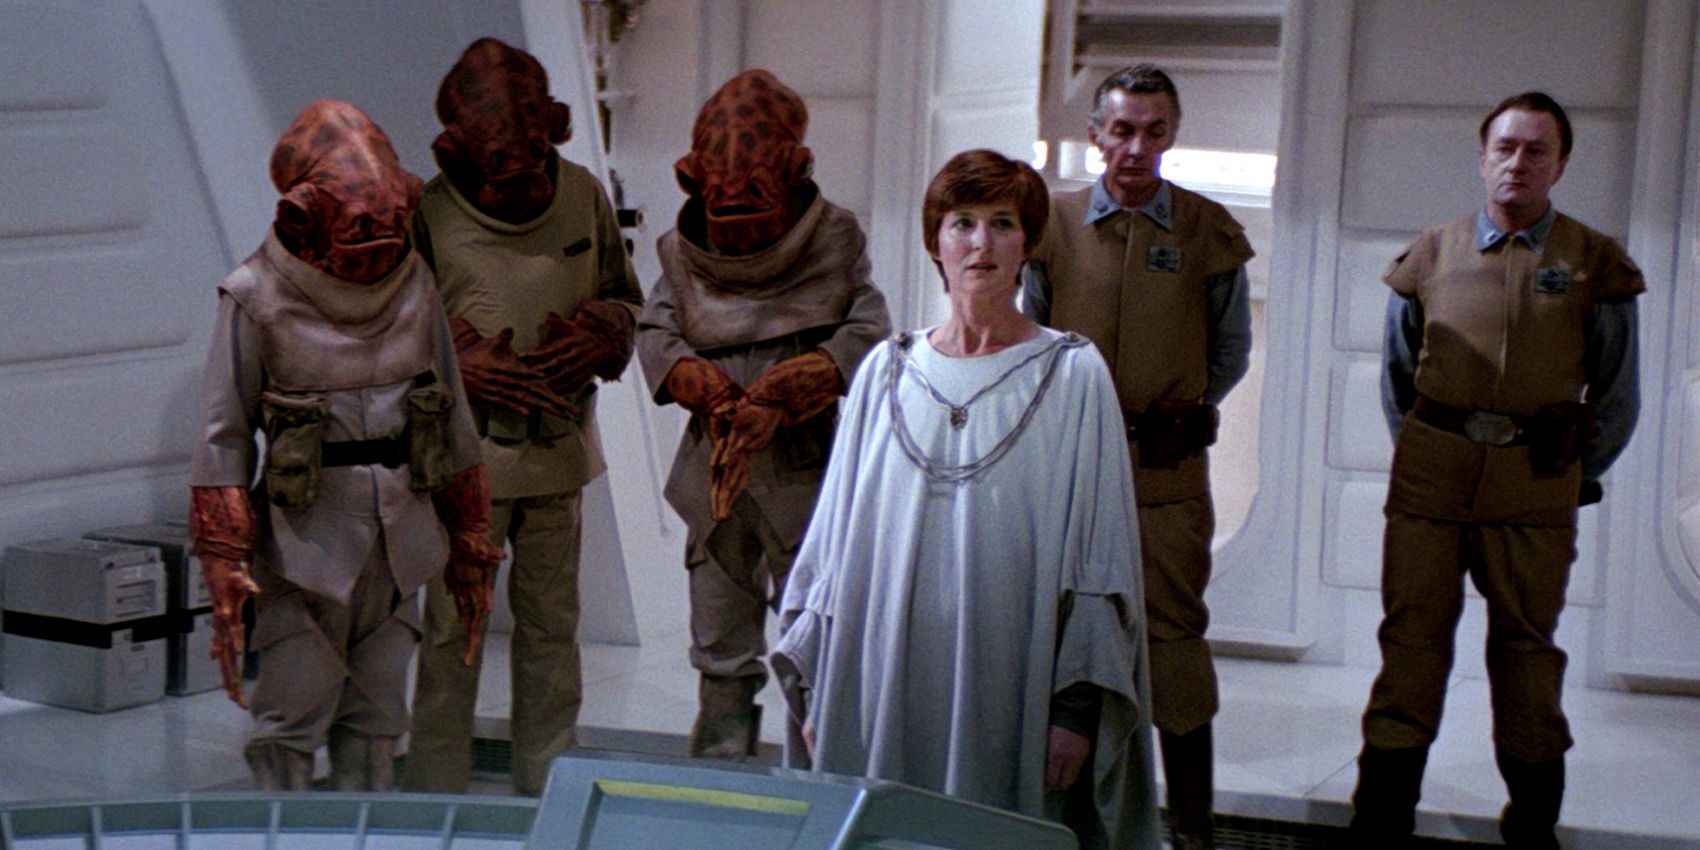 Mon Mothma adresses the rebels prior to the Battle of Endor in Return of the Jedi